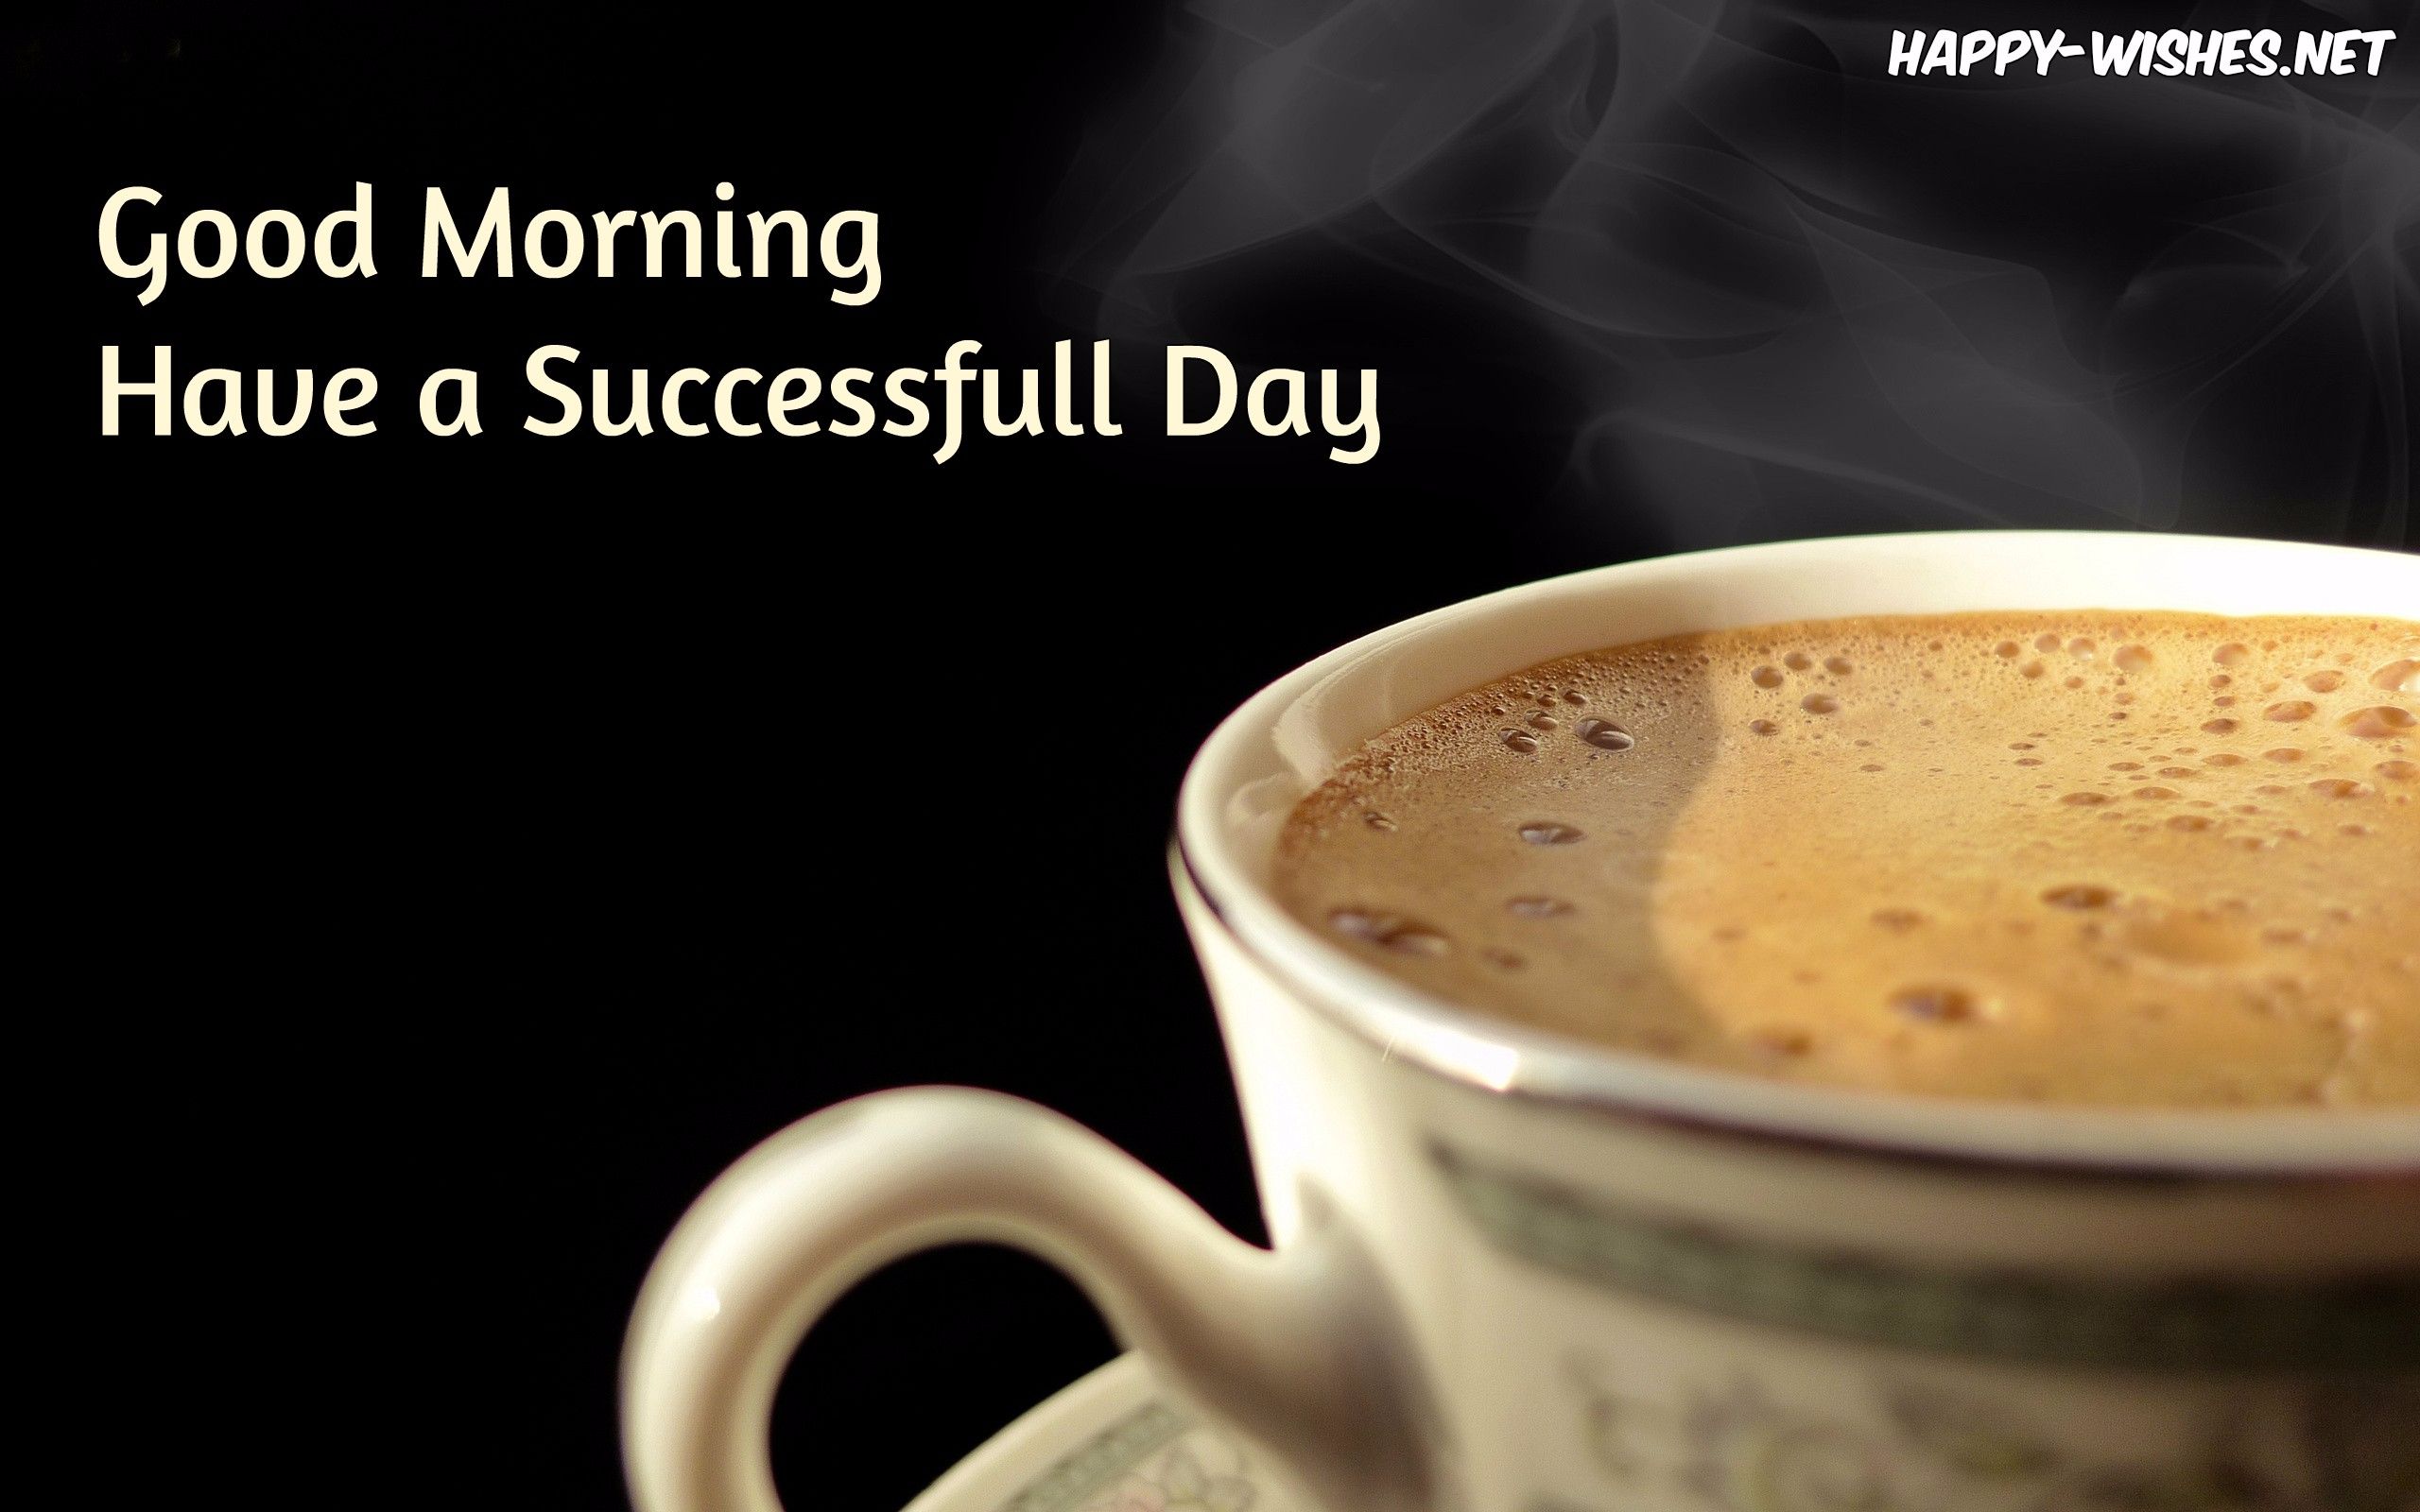 Good morning Coffee Quotes Wishes - Cofee Mug Images